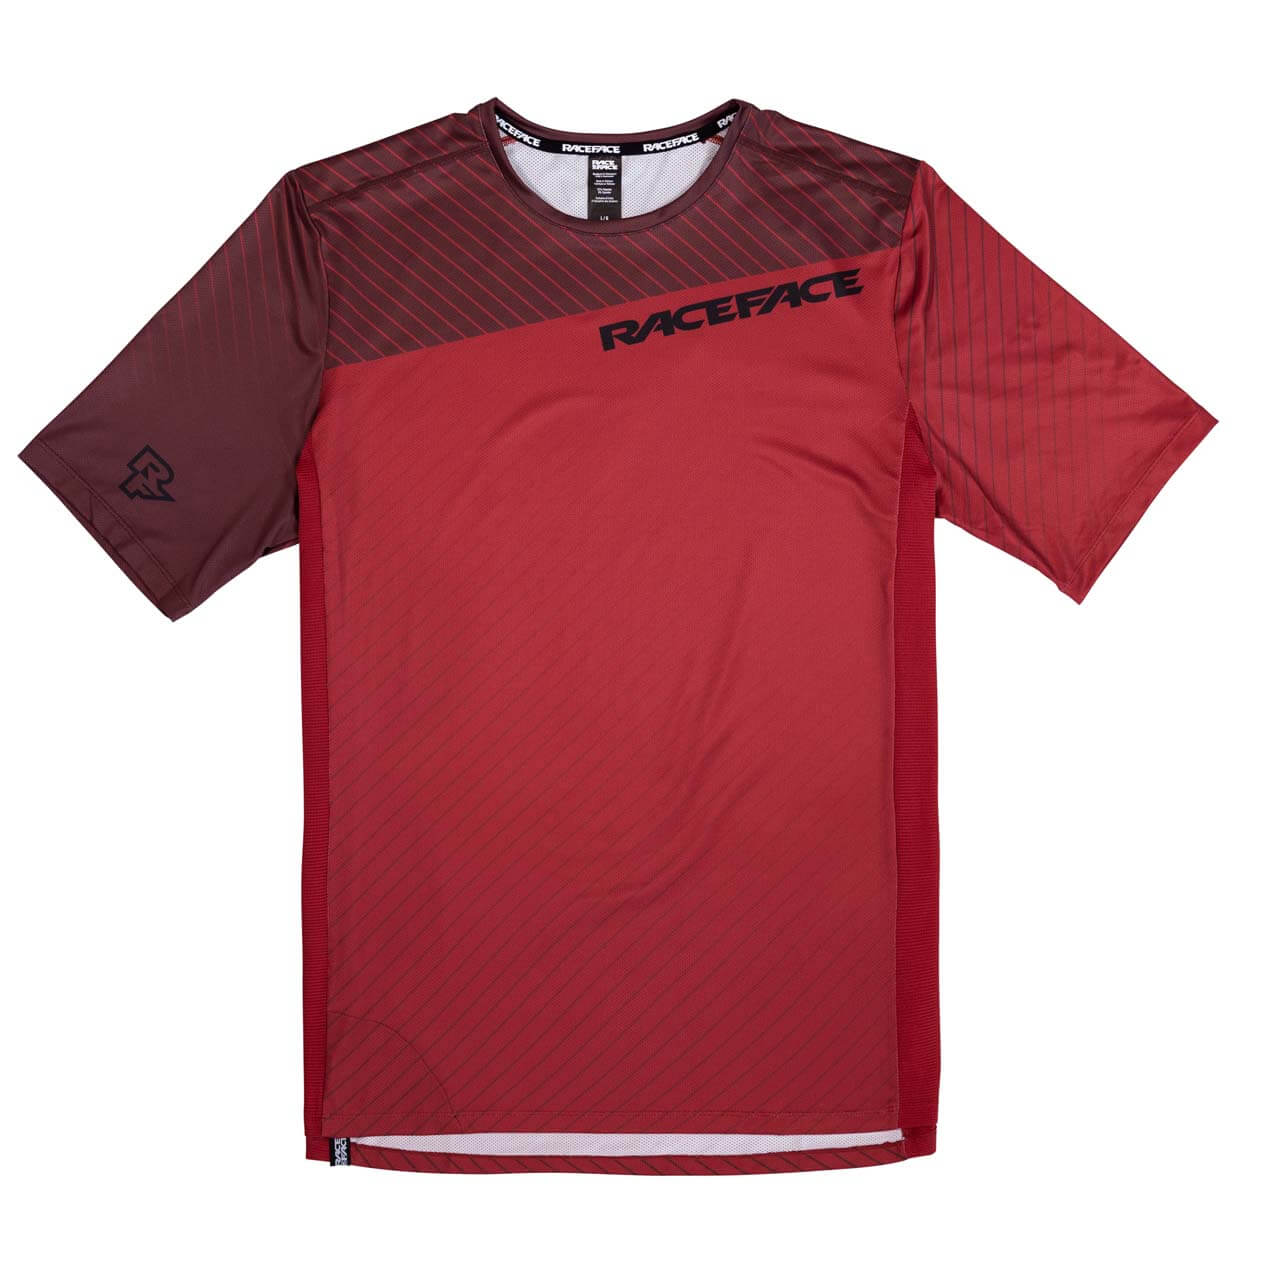 Race Face Bike-Jersey Indy - Red, L von RaceFace